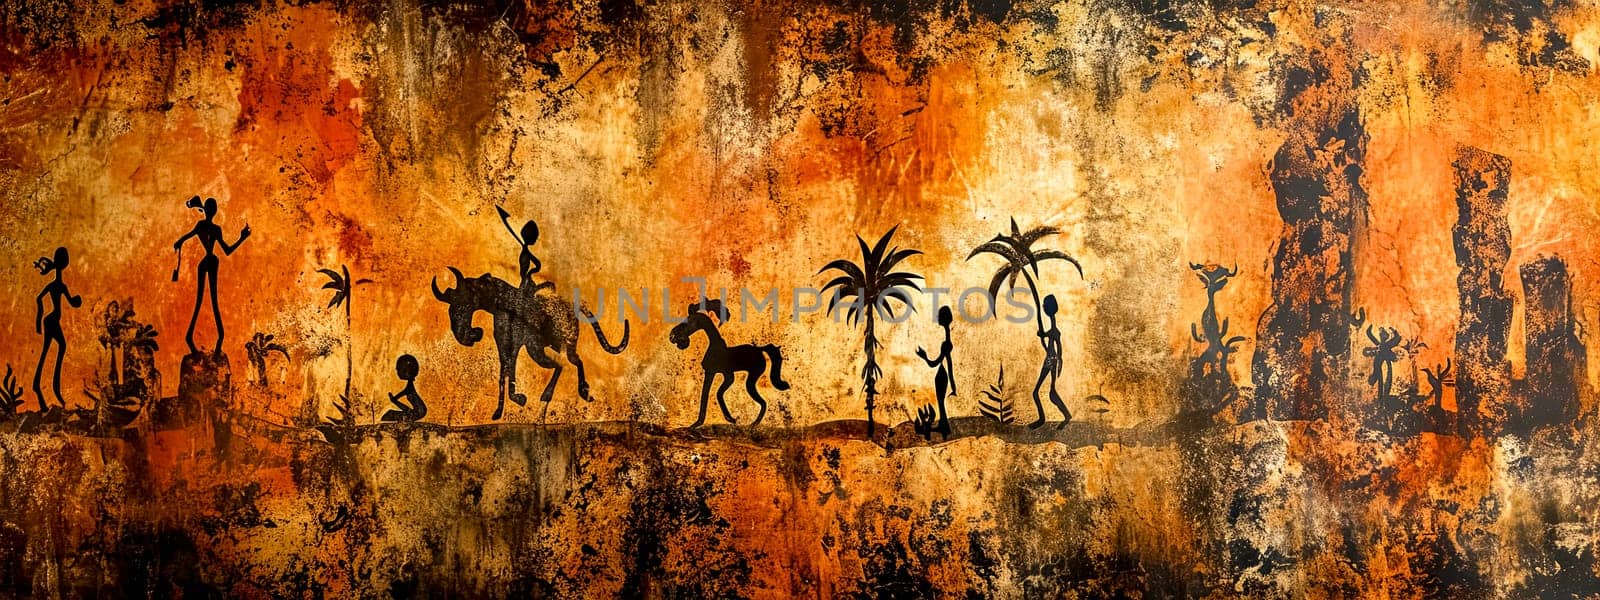 Ancient tribal art style mural with human and animal figures by Edophoto